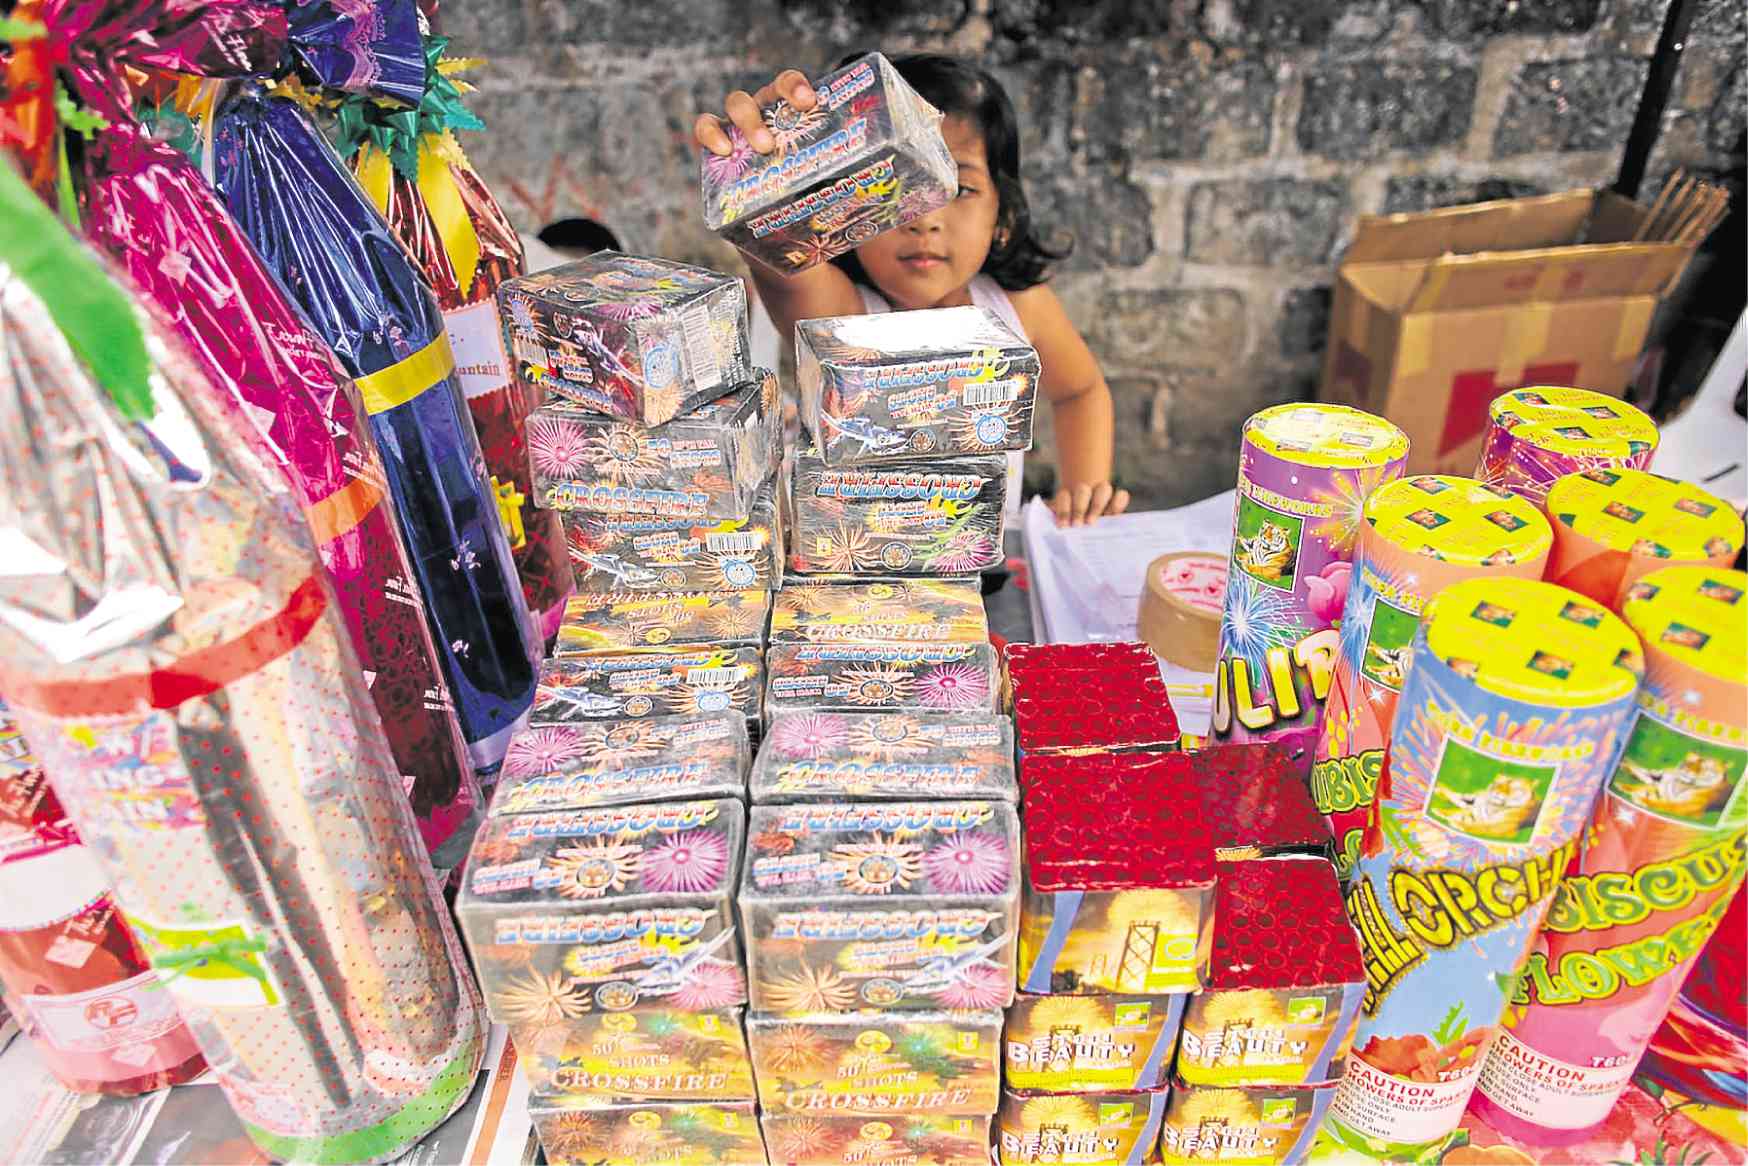 DOH: 13 injured due to fireworks from Dec 21-25